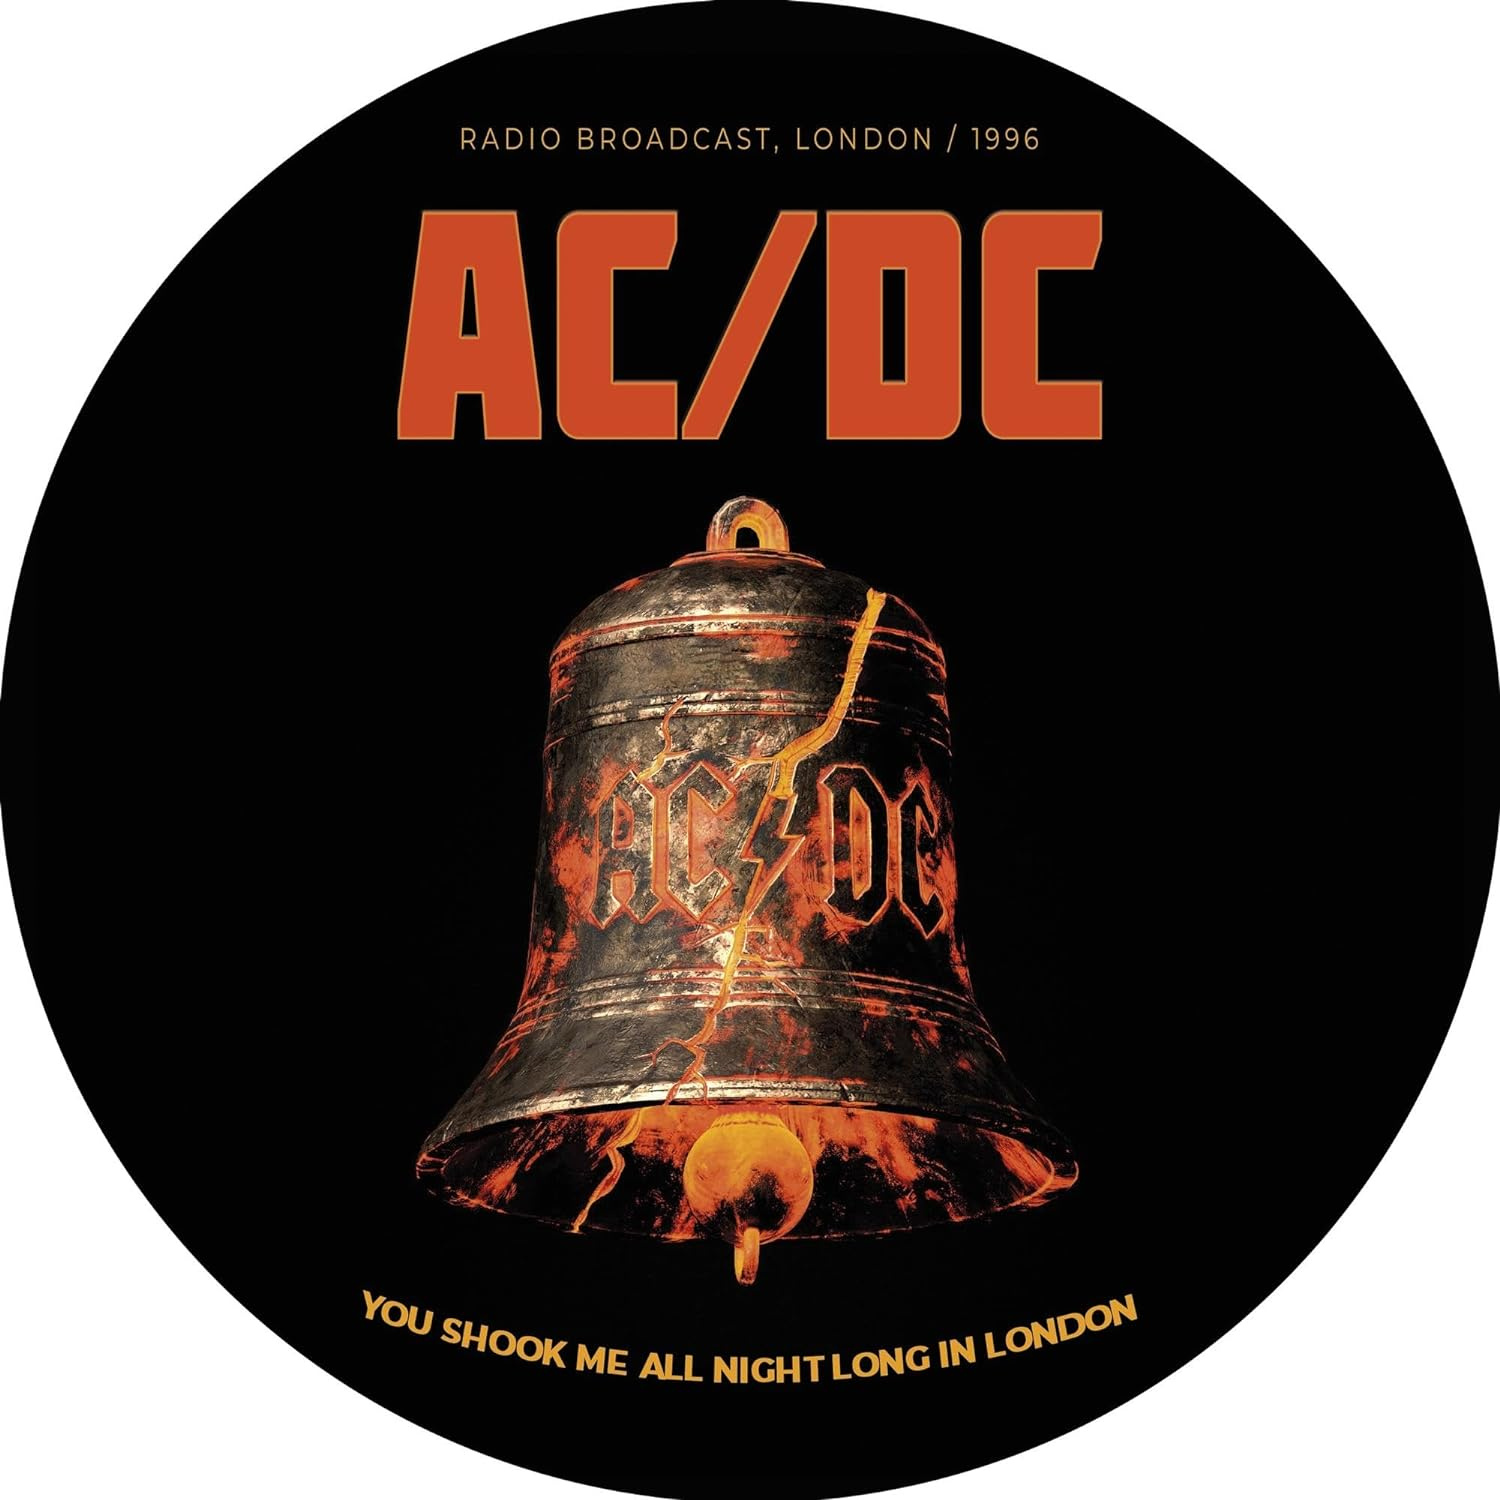 YOU SHOOK ME ALL NIGHT LONG IN LONDON - PICTURE DISC